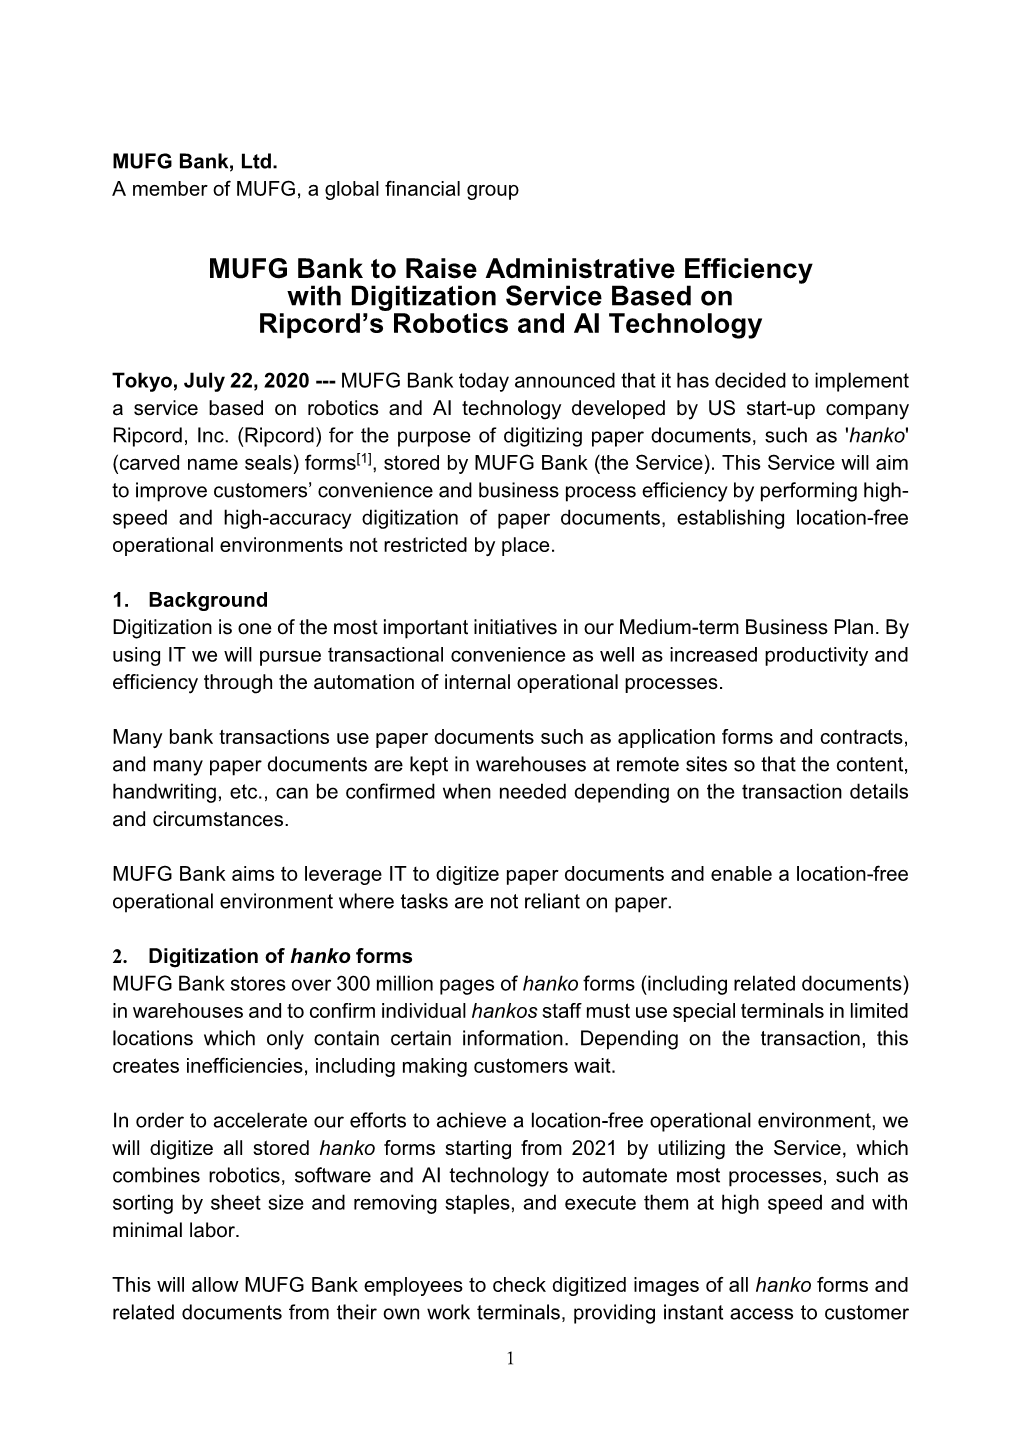 MUFG Bank to Raise Administrative Efficiency with Digitization Service Based on Ripcord’S Robotics and AI Technology